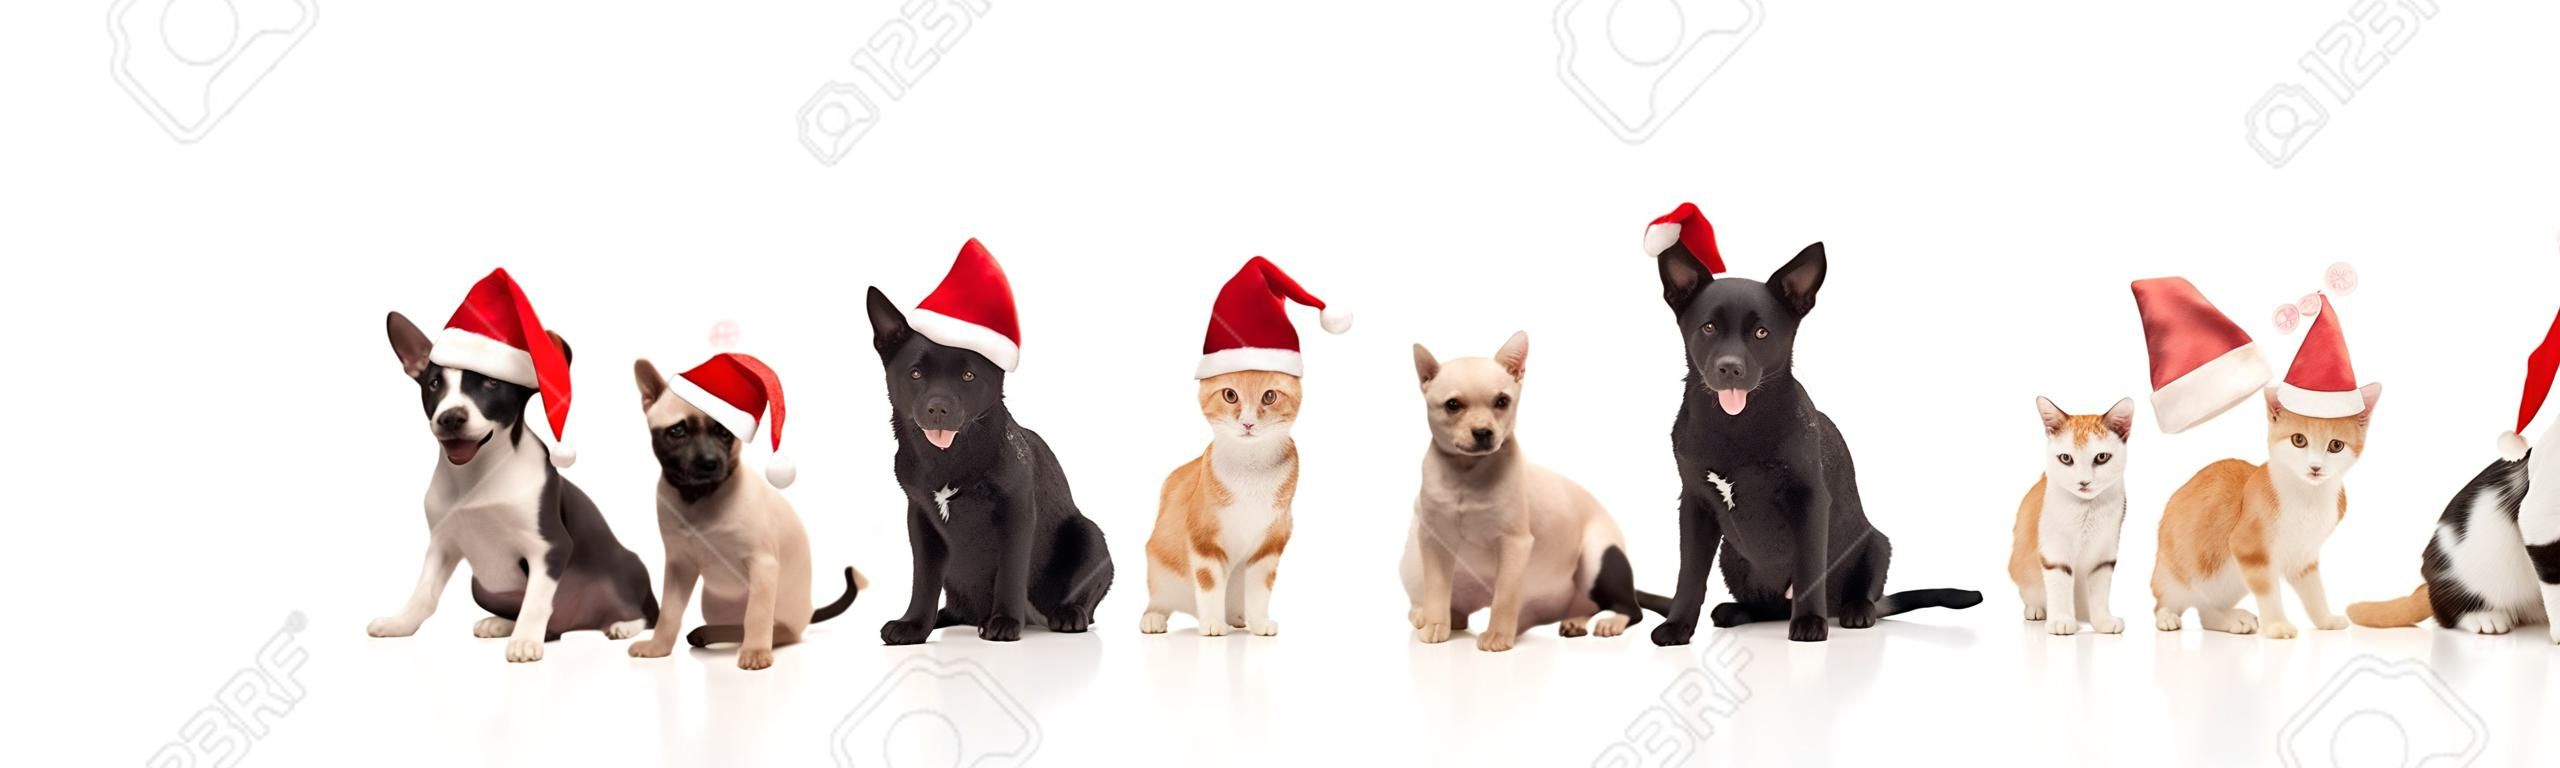 happy santa cats and dogs panting while sitting and standing on white background